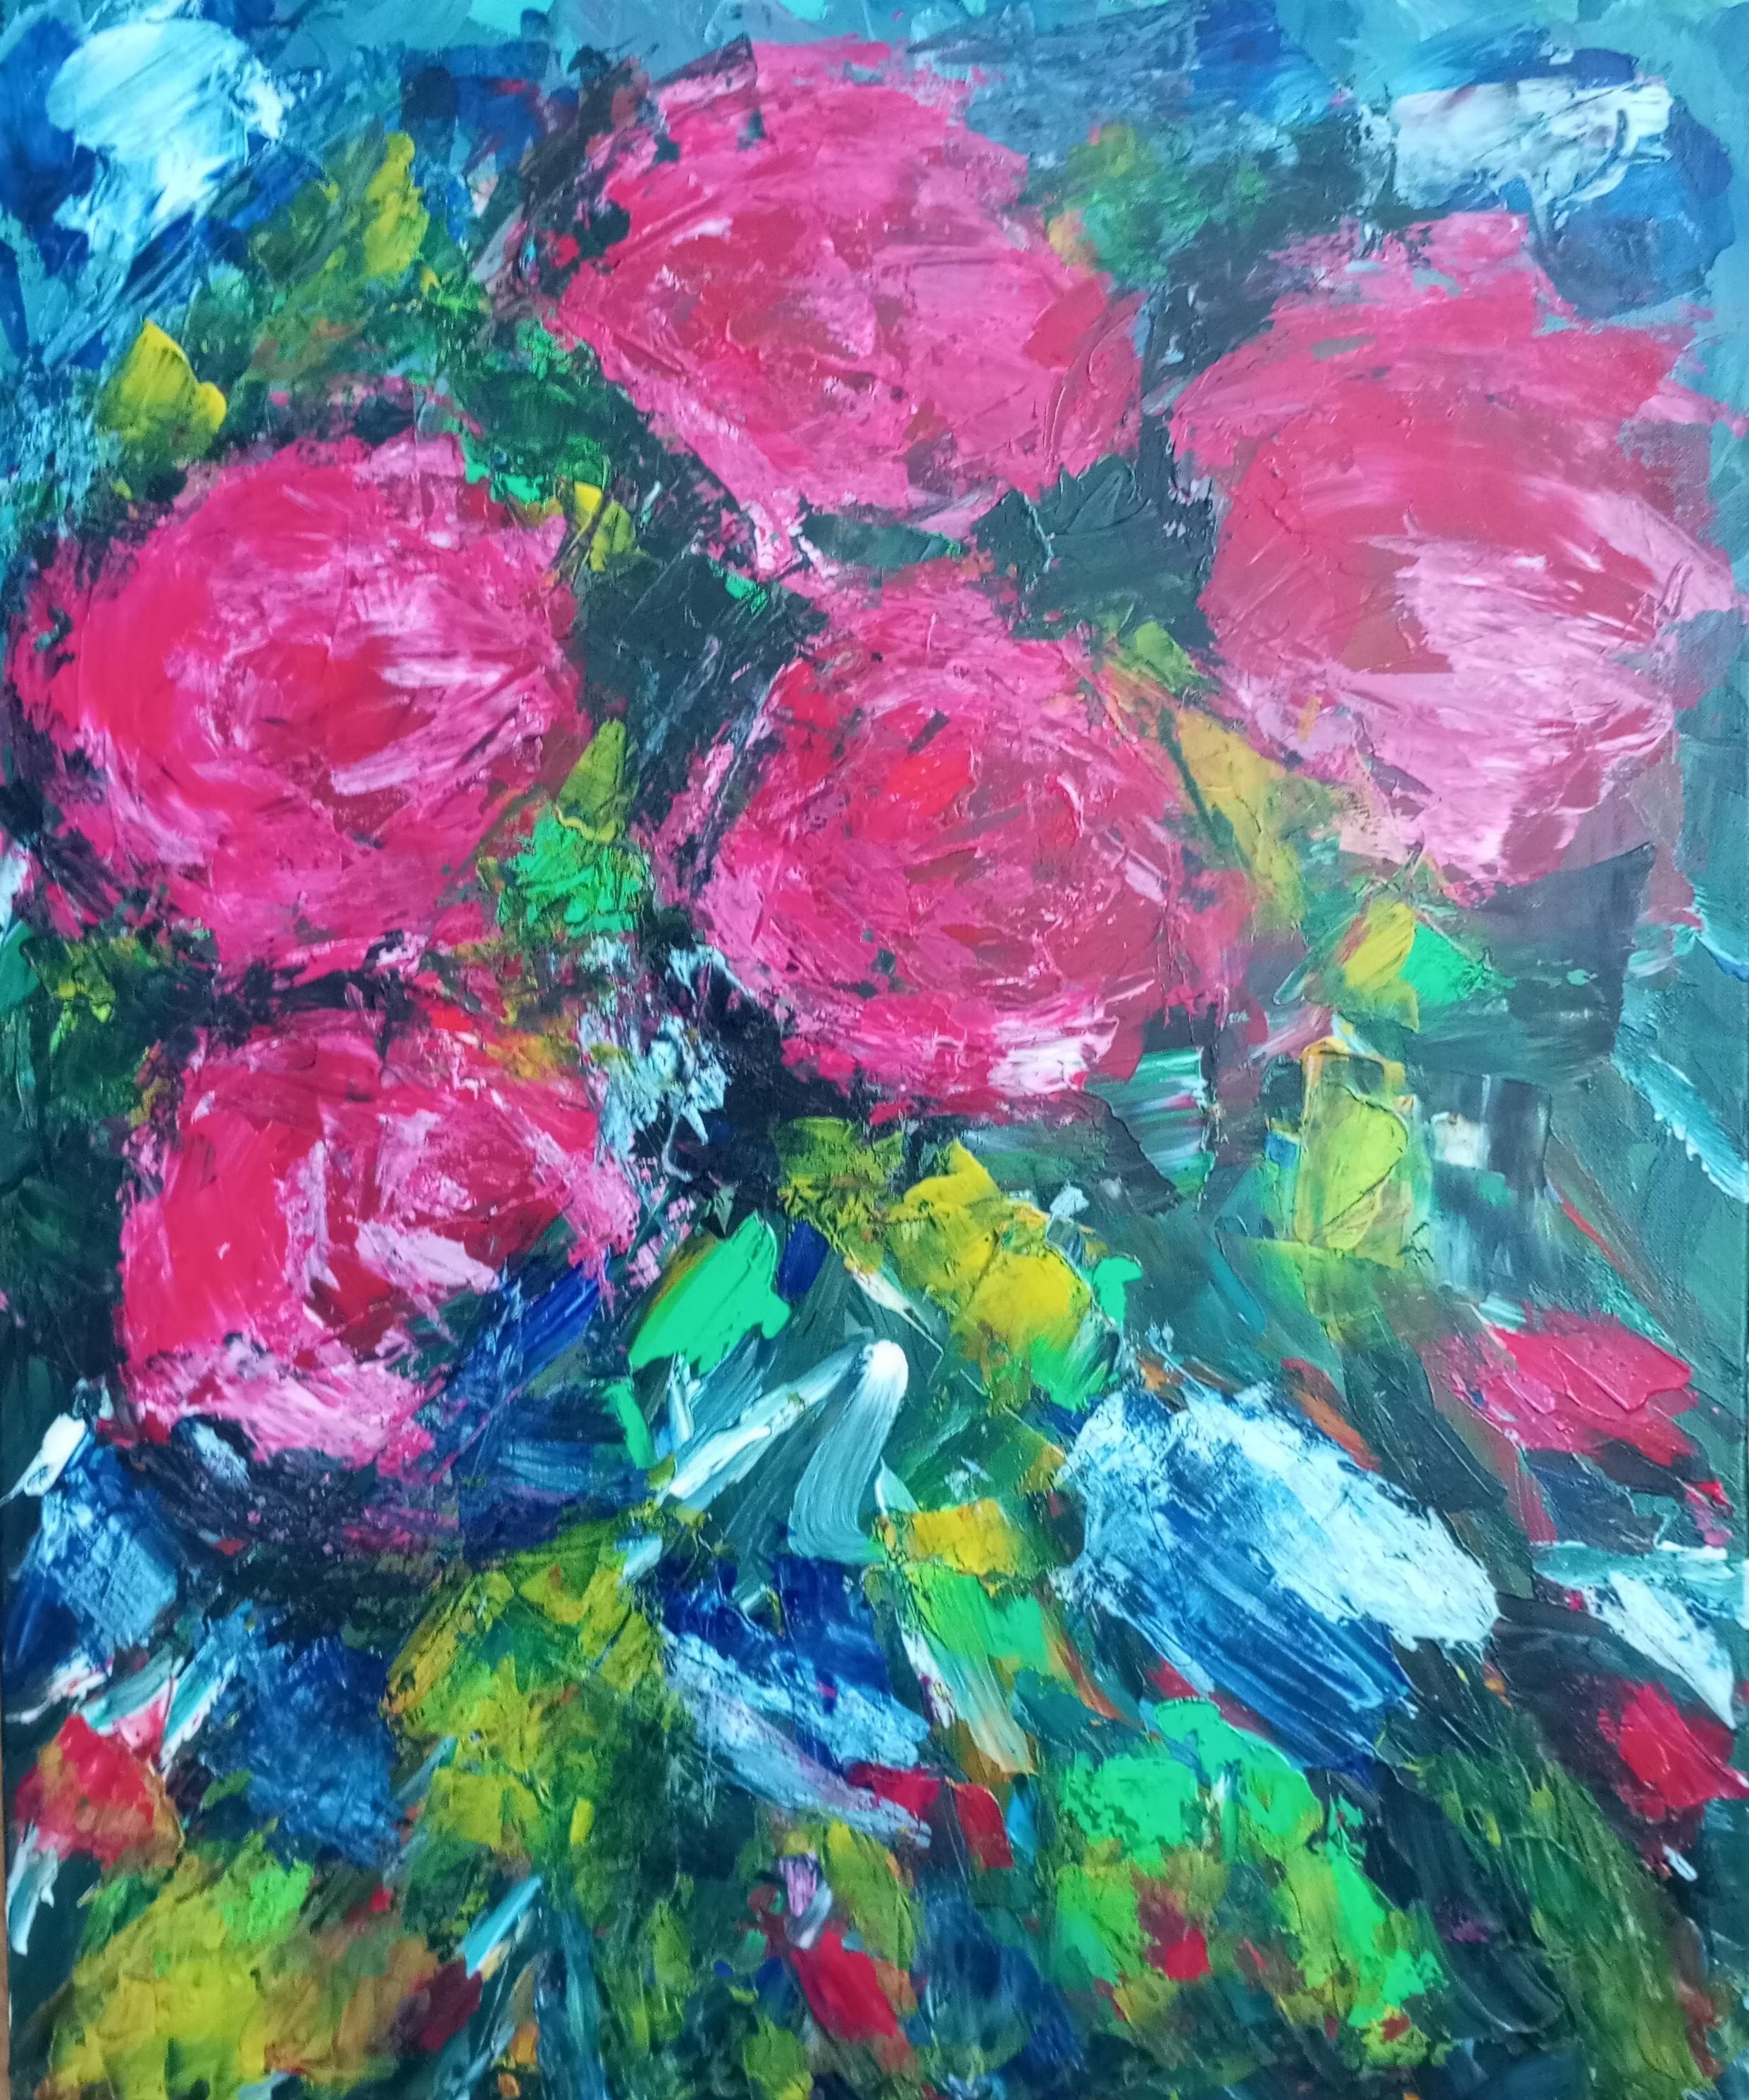  "Scented blooms of roses"